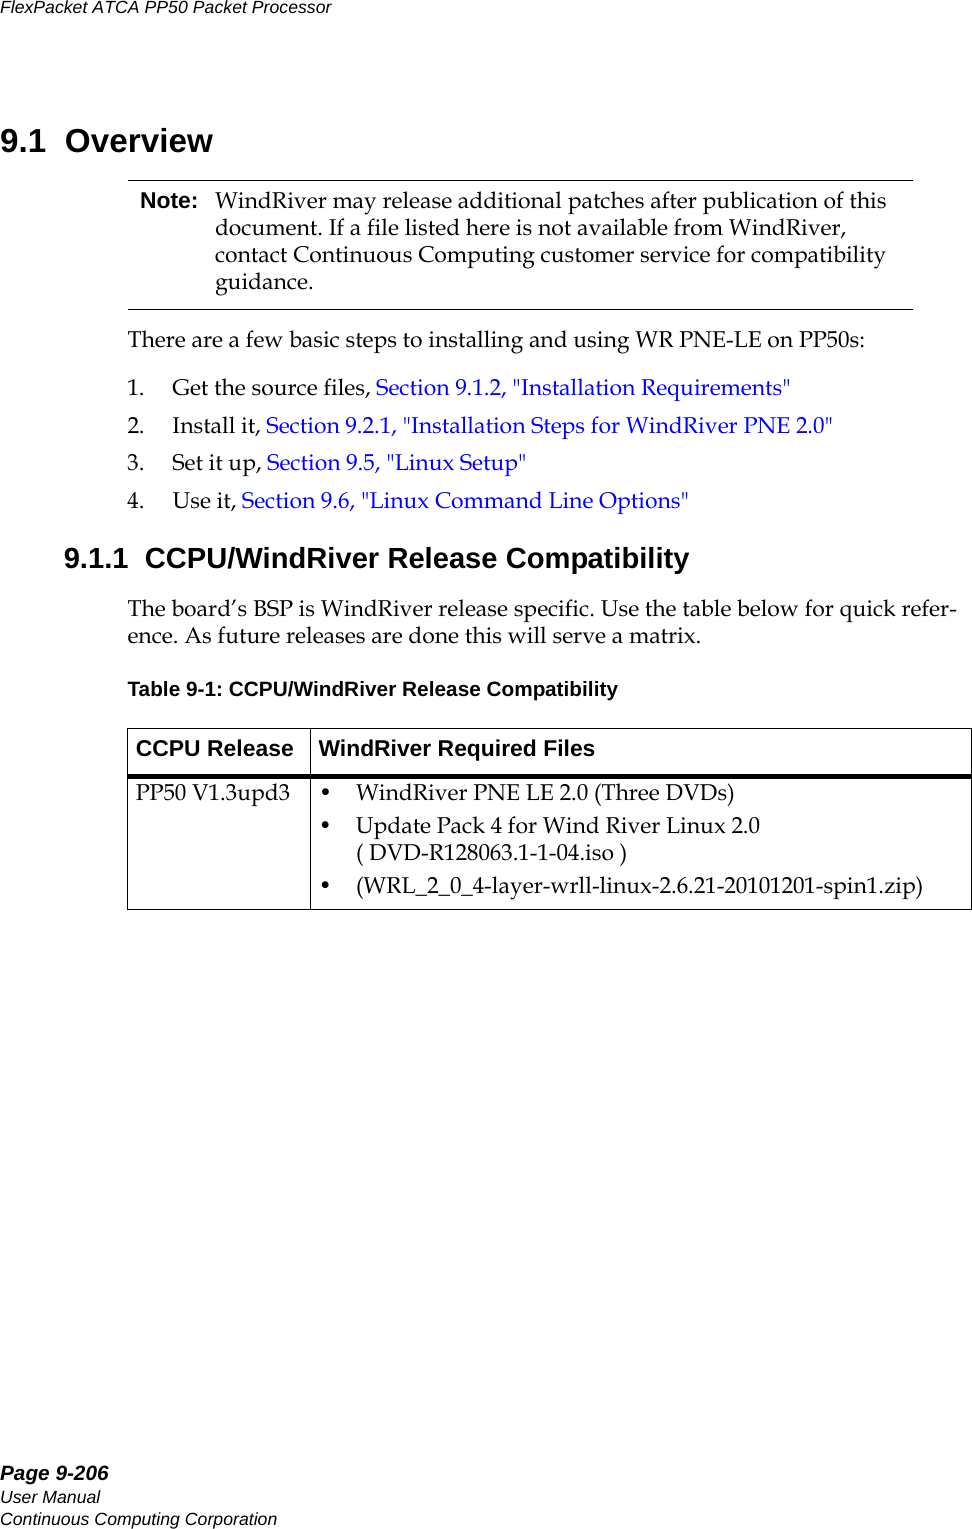 Page 9-206User ManualContinuous Computing CorporationFlexPacket ATCA PP50 Packet Processor     Preliminary9.1  OverviewThere are a few basic steps to installing and using WR PNE-LE on PP50s:1. Get the source files, Section9.1.2, &quot;Installation Requirements&quot;2. Install it, Section9.2.1, &quot;Installation Steps for WindRiver PNE 2.0&quot;3. Set it up, Section9.5, &quot;Linux Setup&quot;4. Use it, Section9.6, &quot;Linux Command Line Options&quot;9.1.1  CCPU/WindRiver Release CompatibilityThe board’s BSP is WindRiver release specific. Use the table below for quick refer-ence. As future releases are done this will serve a matrix. Note: WindRiver may release additional patches after publication of this document. If a file listed here is not available from WindRiver, contact Continuous Computing customer service for compatibility guidance. Table 9-1: CCPU/WindRiver Release CompatibilityCCPU Release WindRiver Required FilesPP50 V1.3upd3 • WindRiver PNE LE 2.0 (Three DVDs)• Update Pack 4 for Wind River Linux 2.0 ( DVD-R128063.1-1-04.iso )• (WRL_2_0_4-layer-wrll-linux-2.6.21-20101201-spin1.zip)